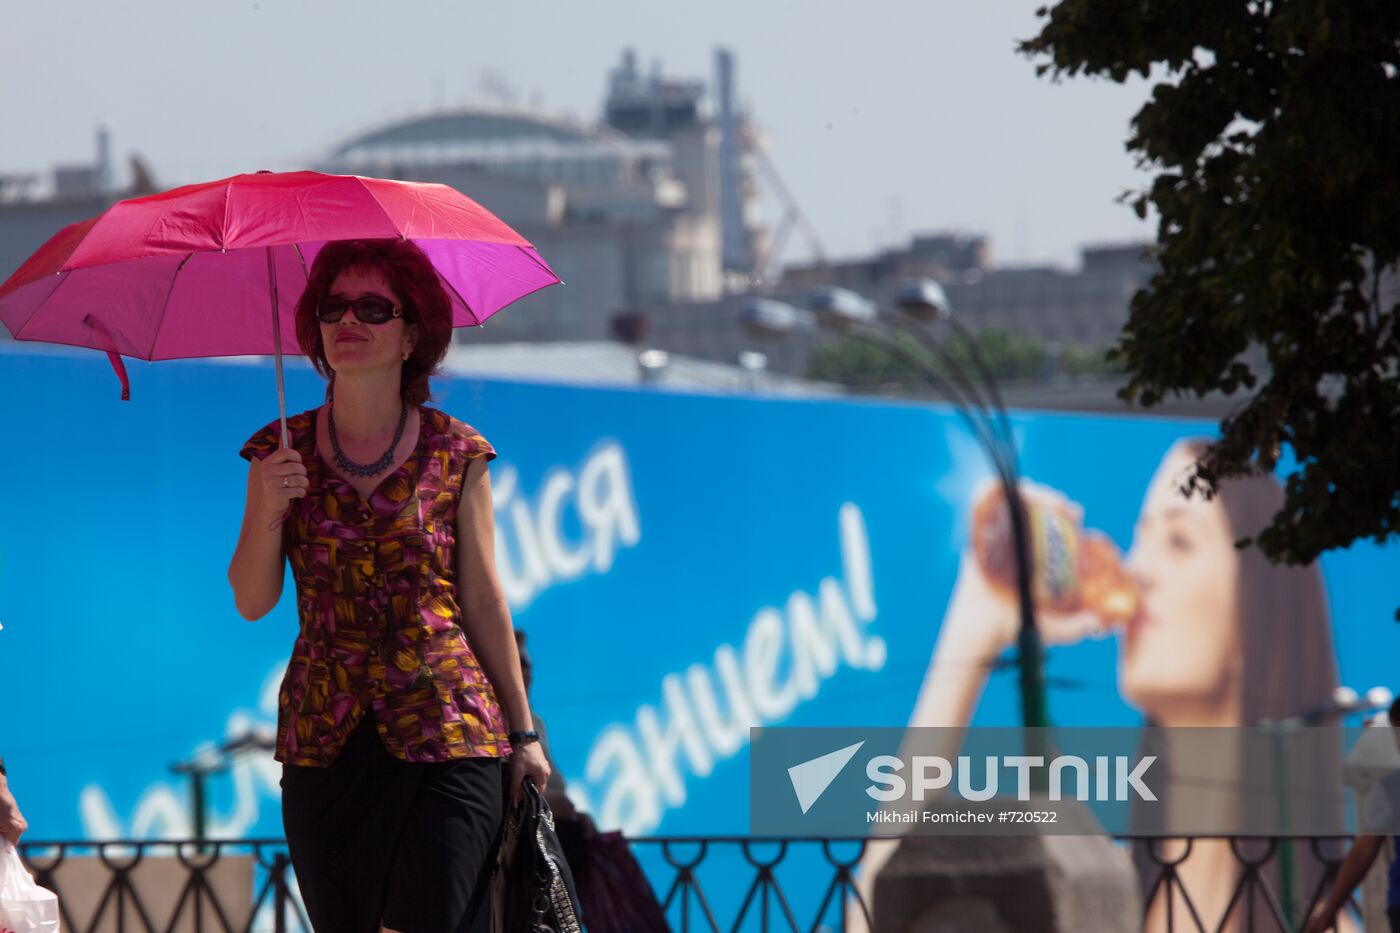 Scorching heat in Moscow